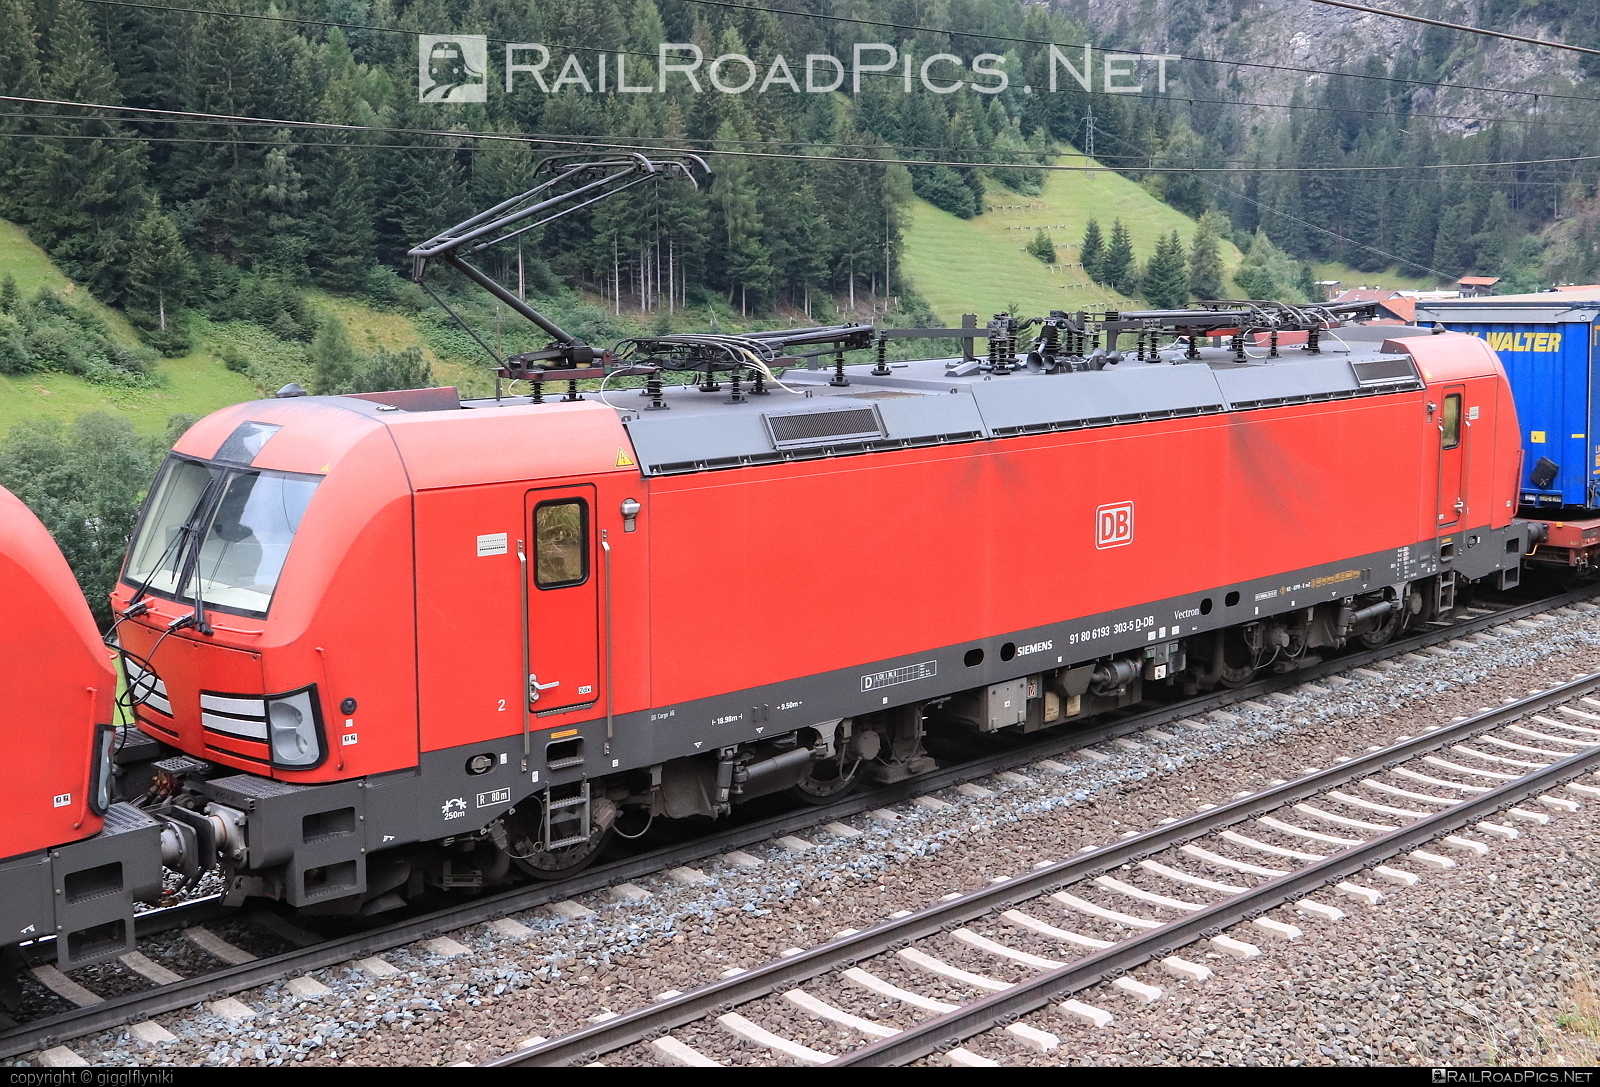 Siemens Vectron MS - 193 303 operated by DB Cargo AG #db #dbcargo #dbcargoag #deutschebahn #siemens #siemensVectron #siemensVectronMS #vectron #vectronMS